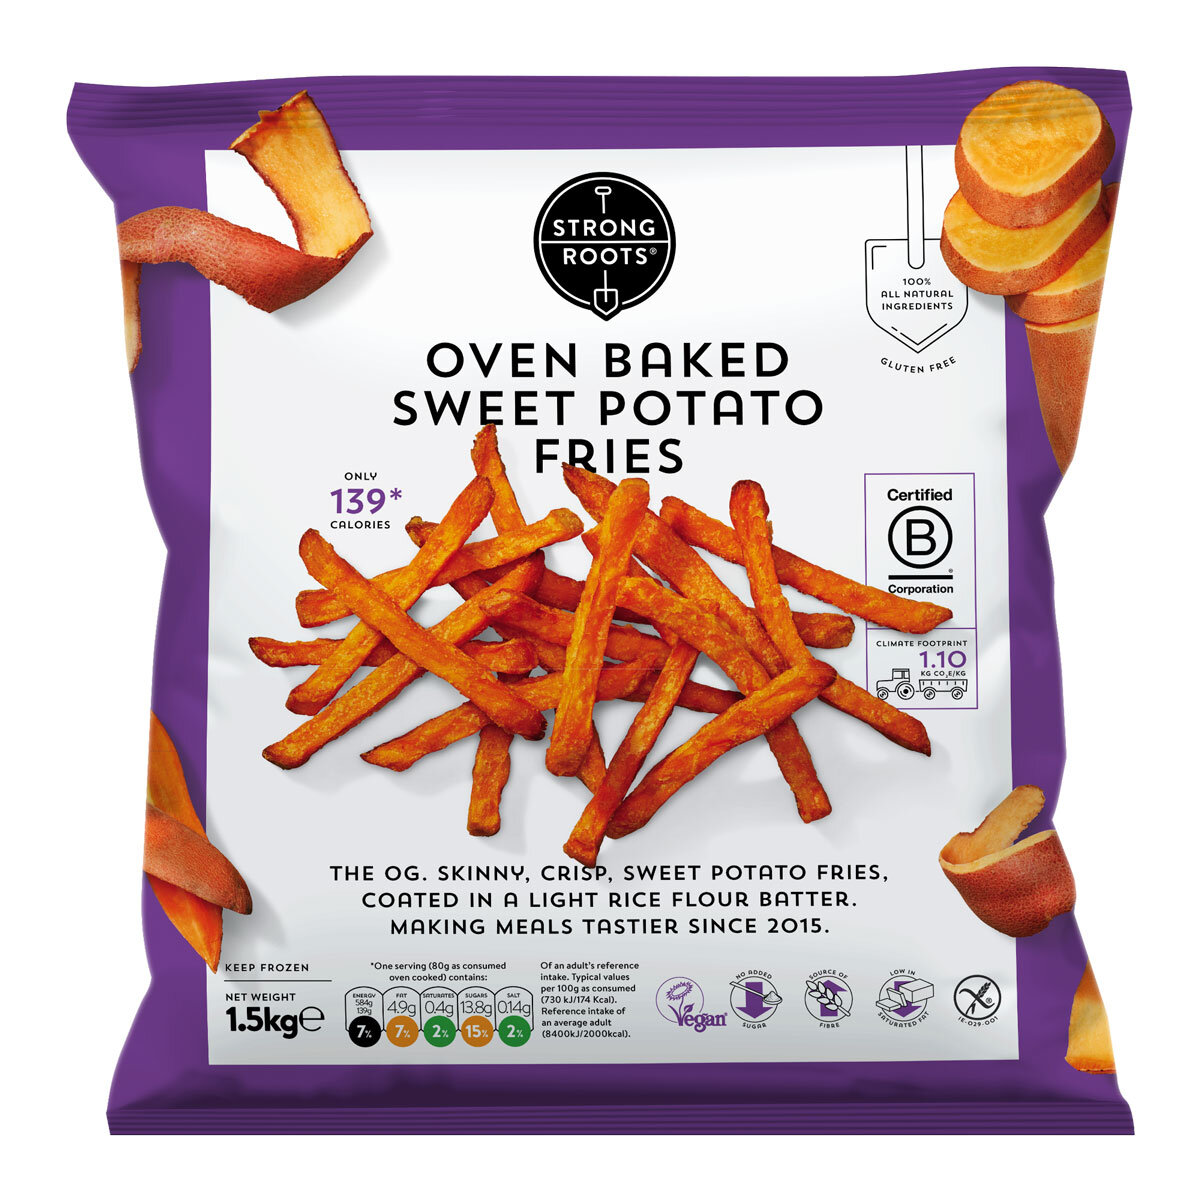 Strong Roots Oven Baked Sweet Potato Fries, 1.5kg